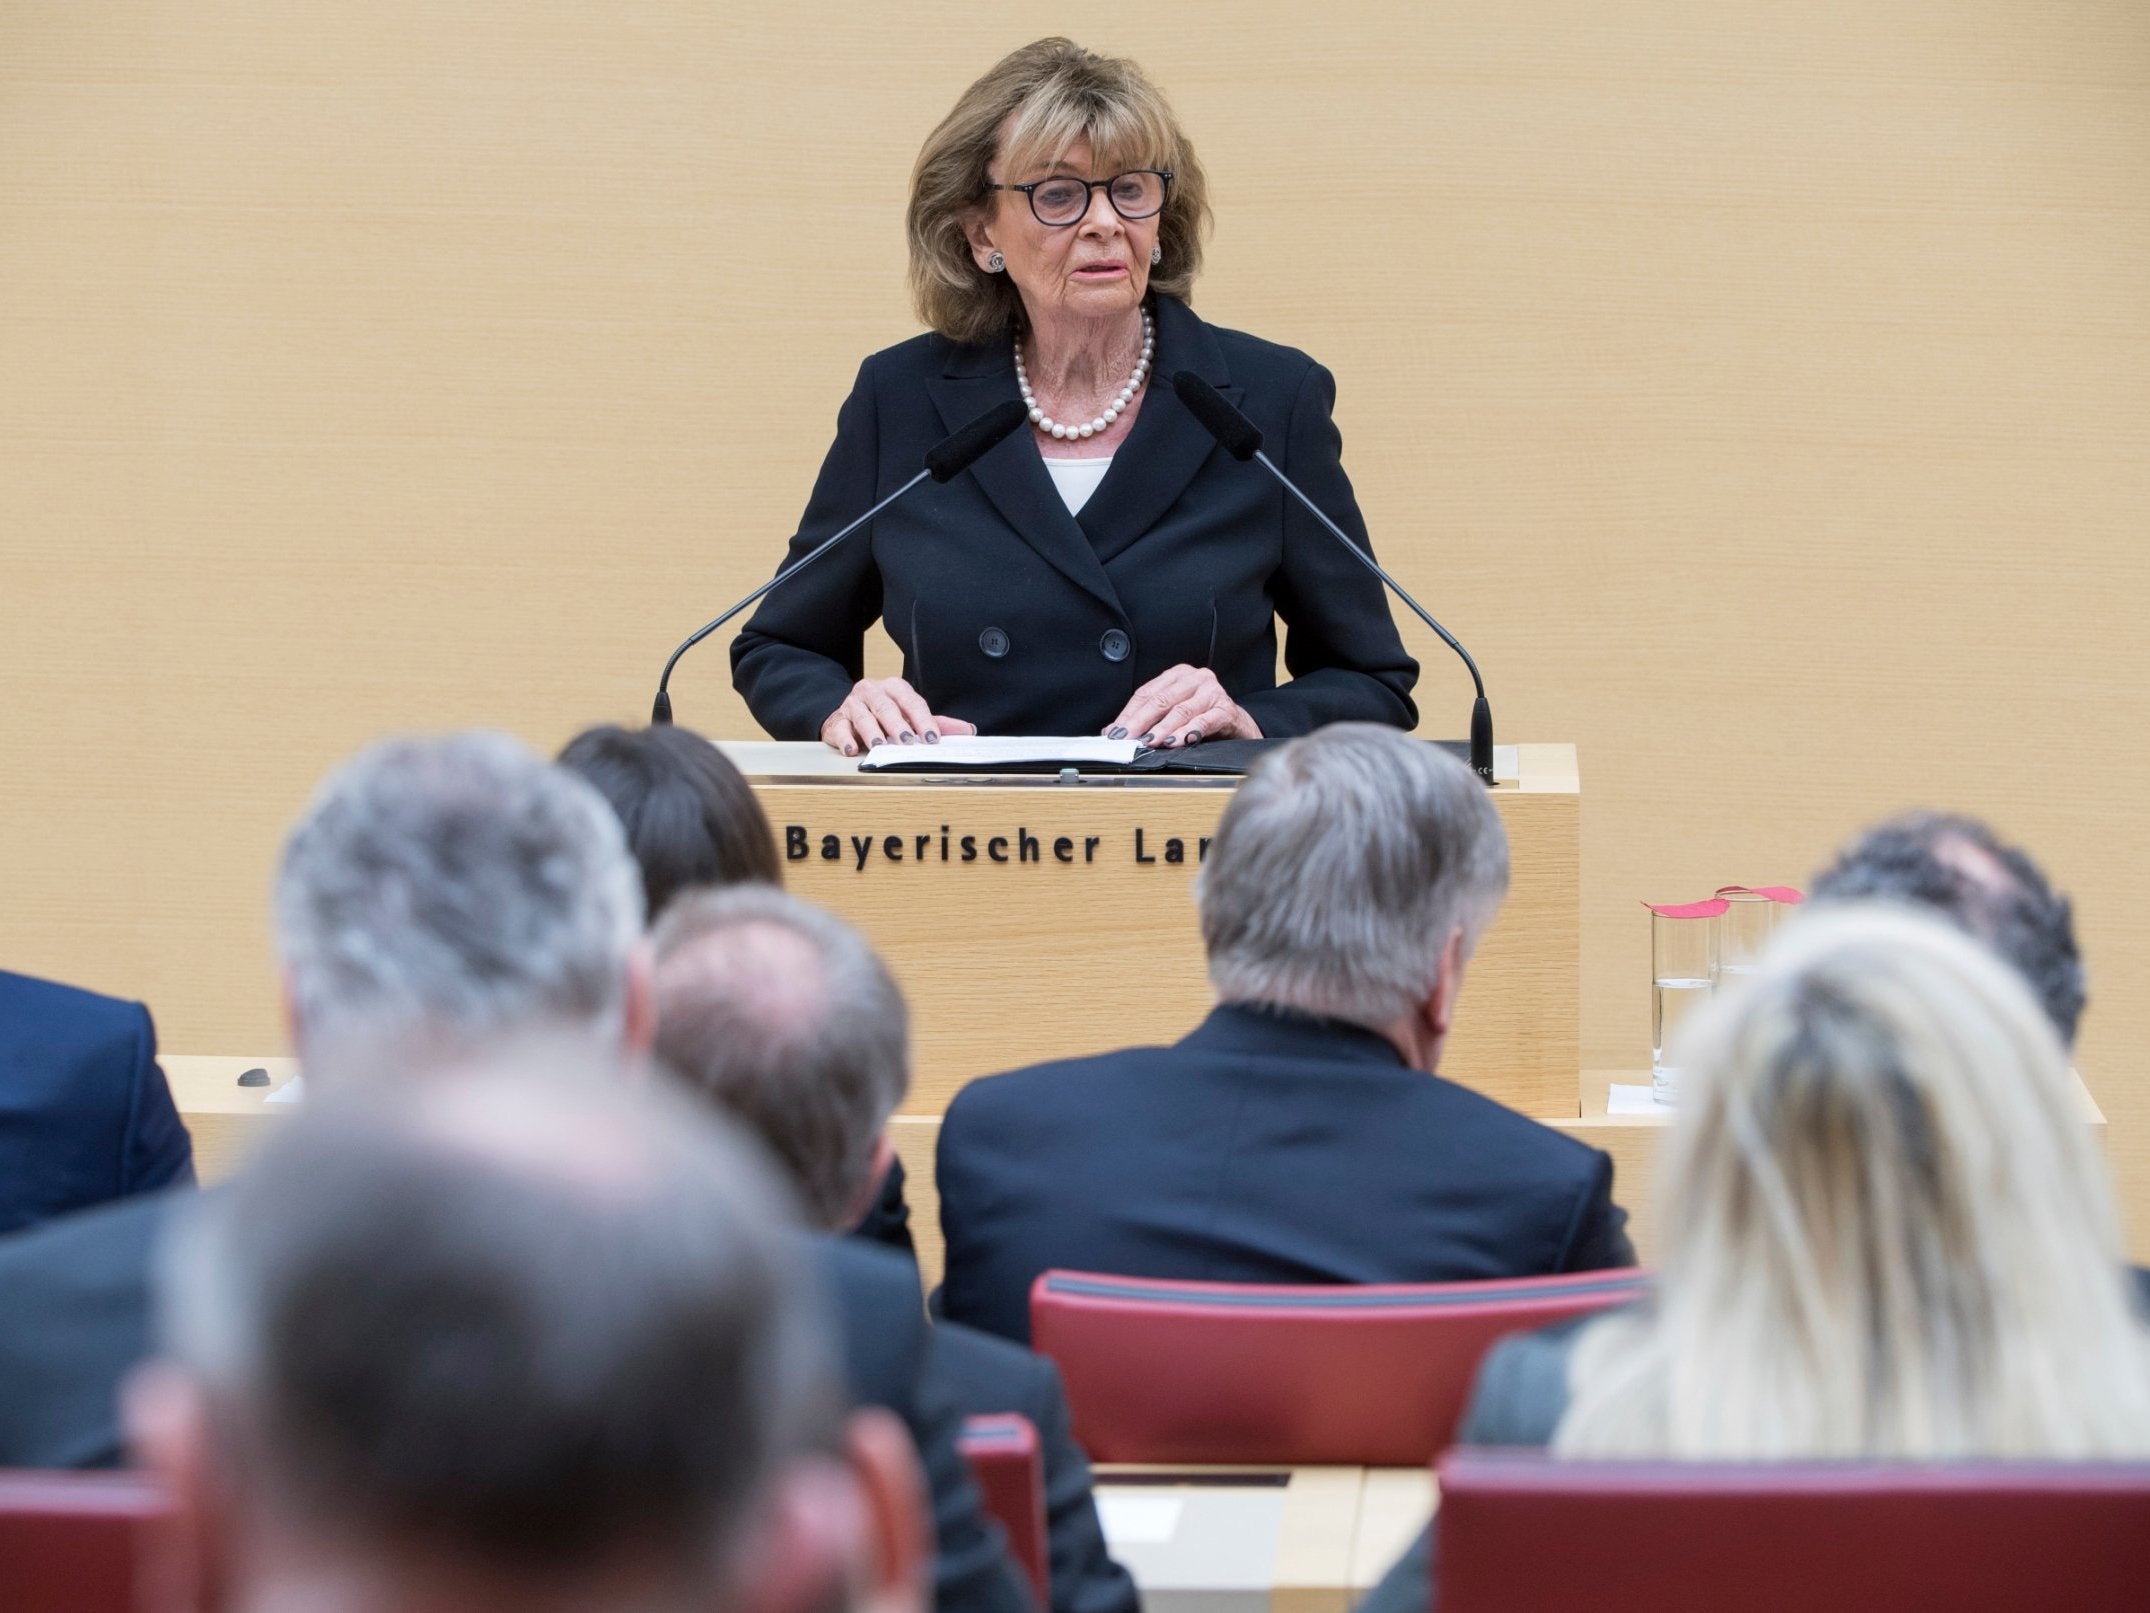 Charlotte Knobloch, Holocaust survivor and former head of Germany’s Central Council of Jews, speaks at the Bavarian Parliament in Munich